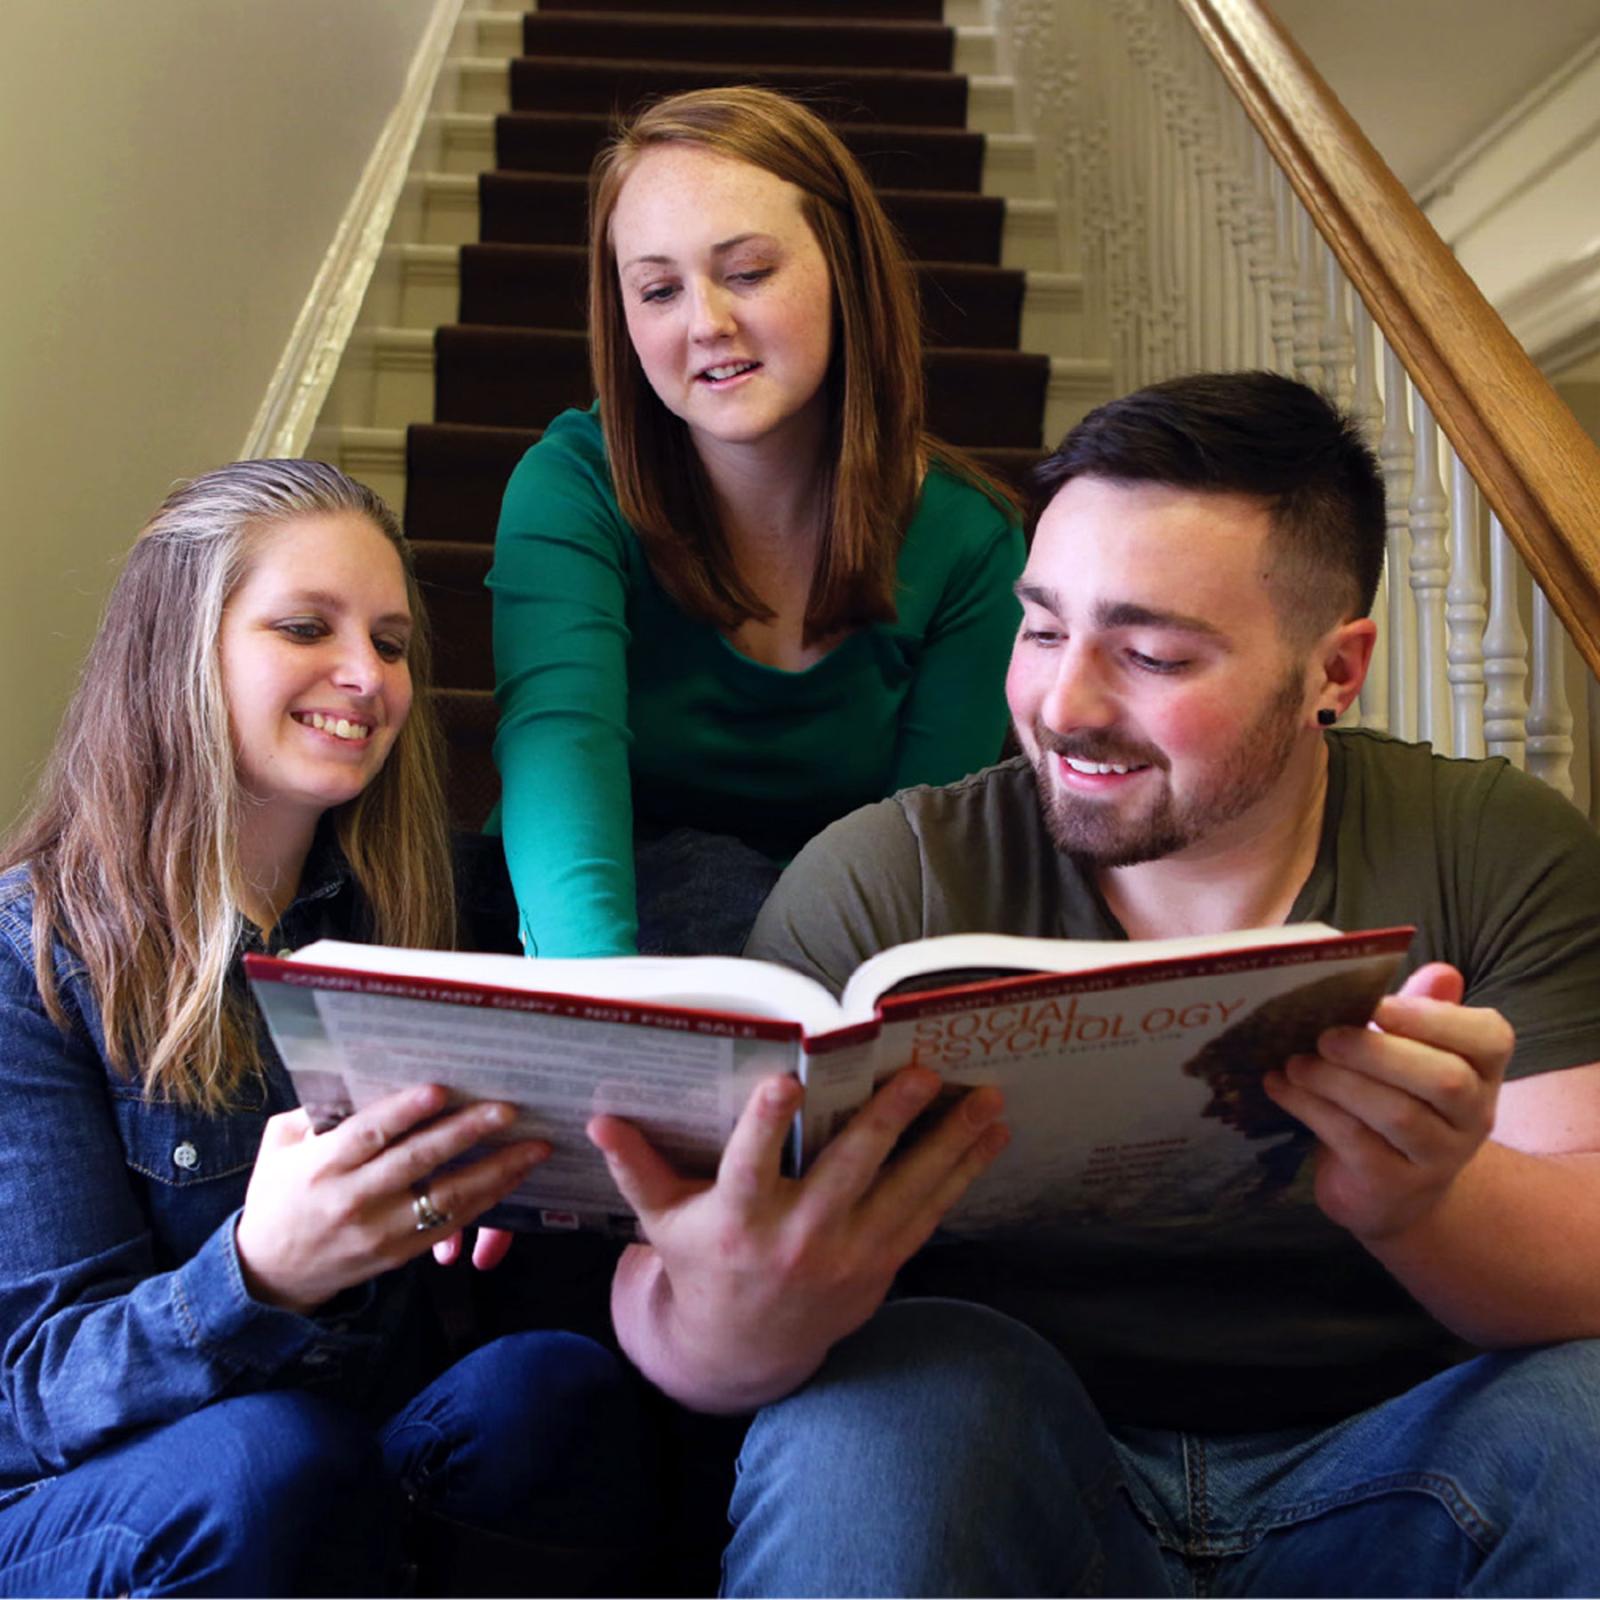 Three Pace University Psychology students look at a textbook together on a set of stairs